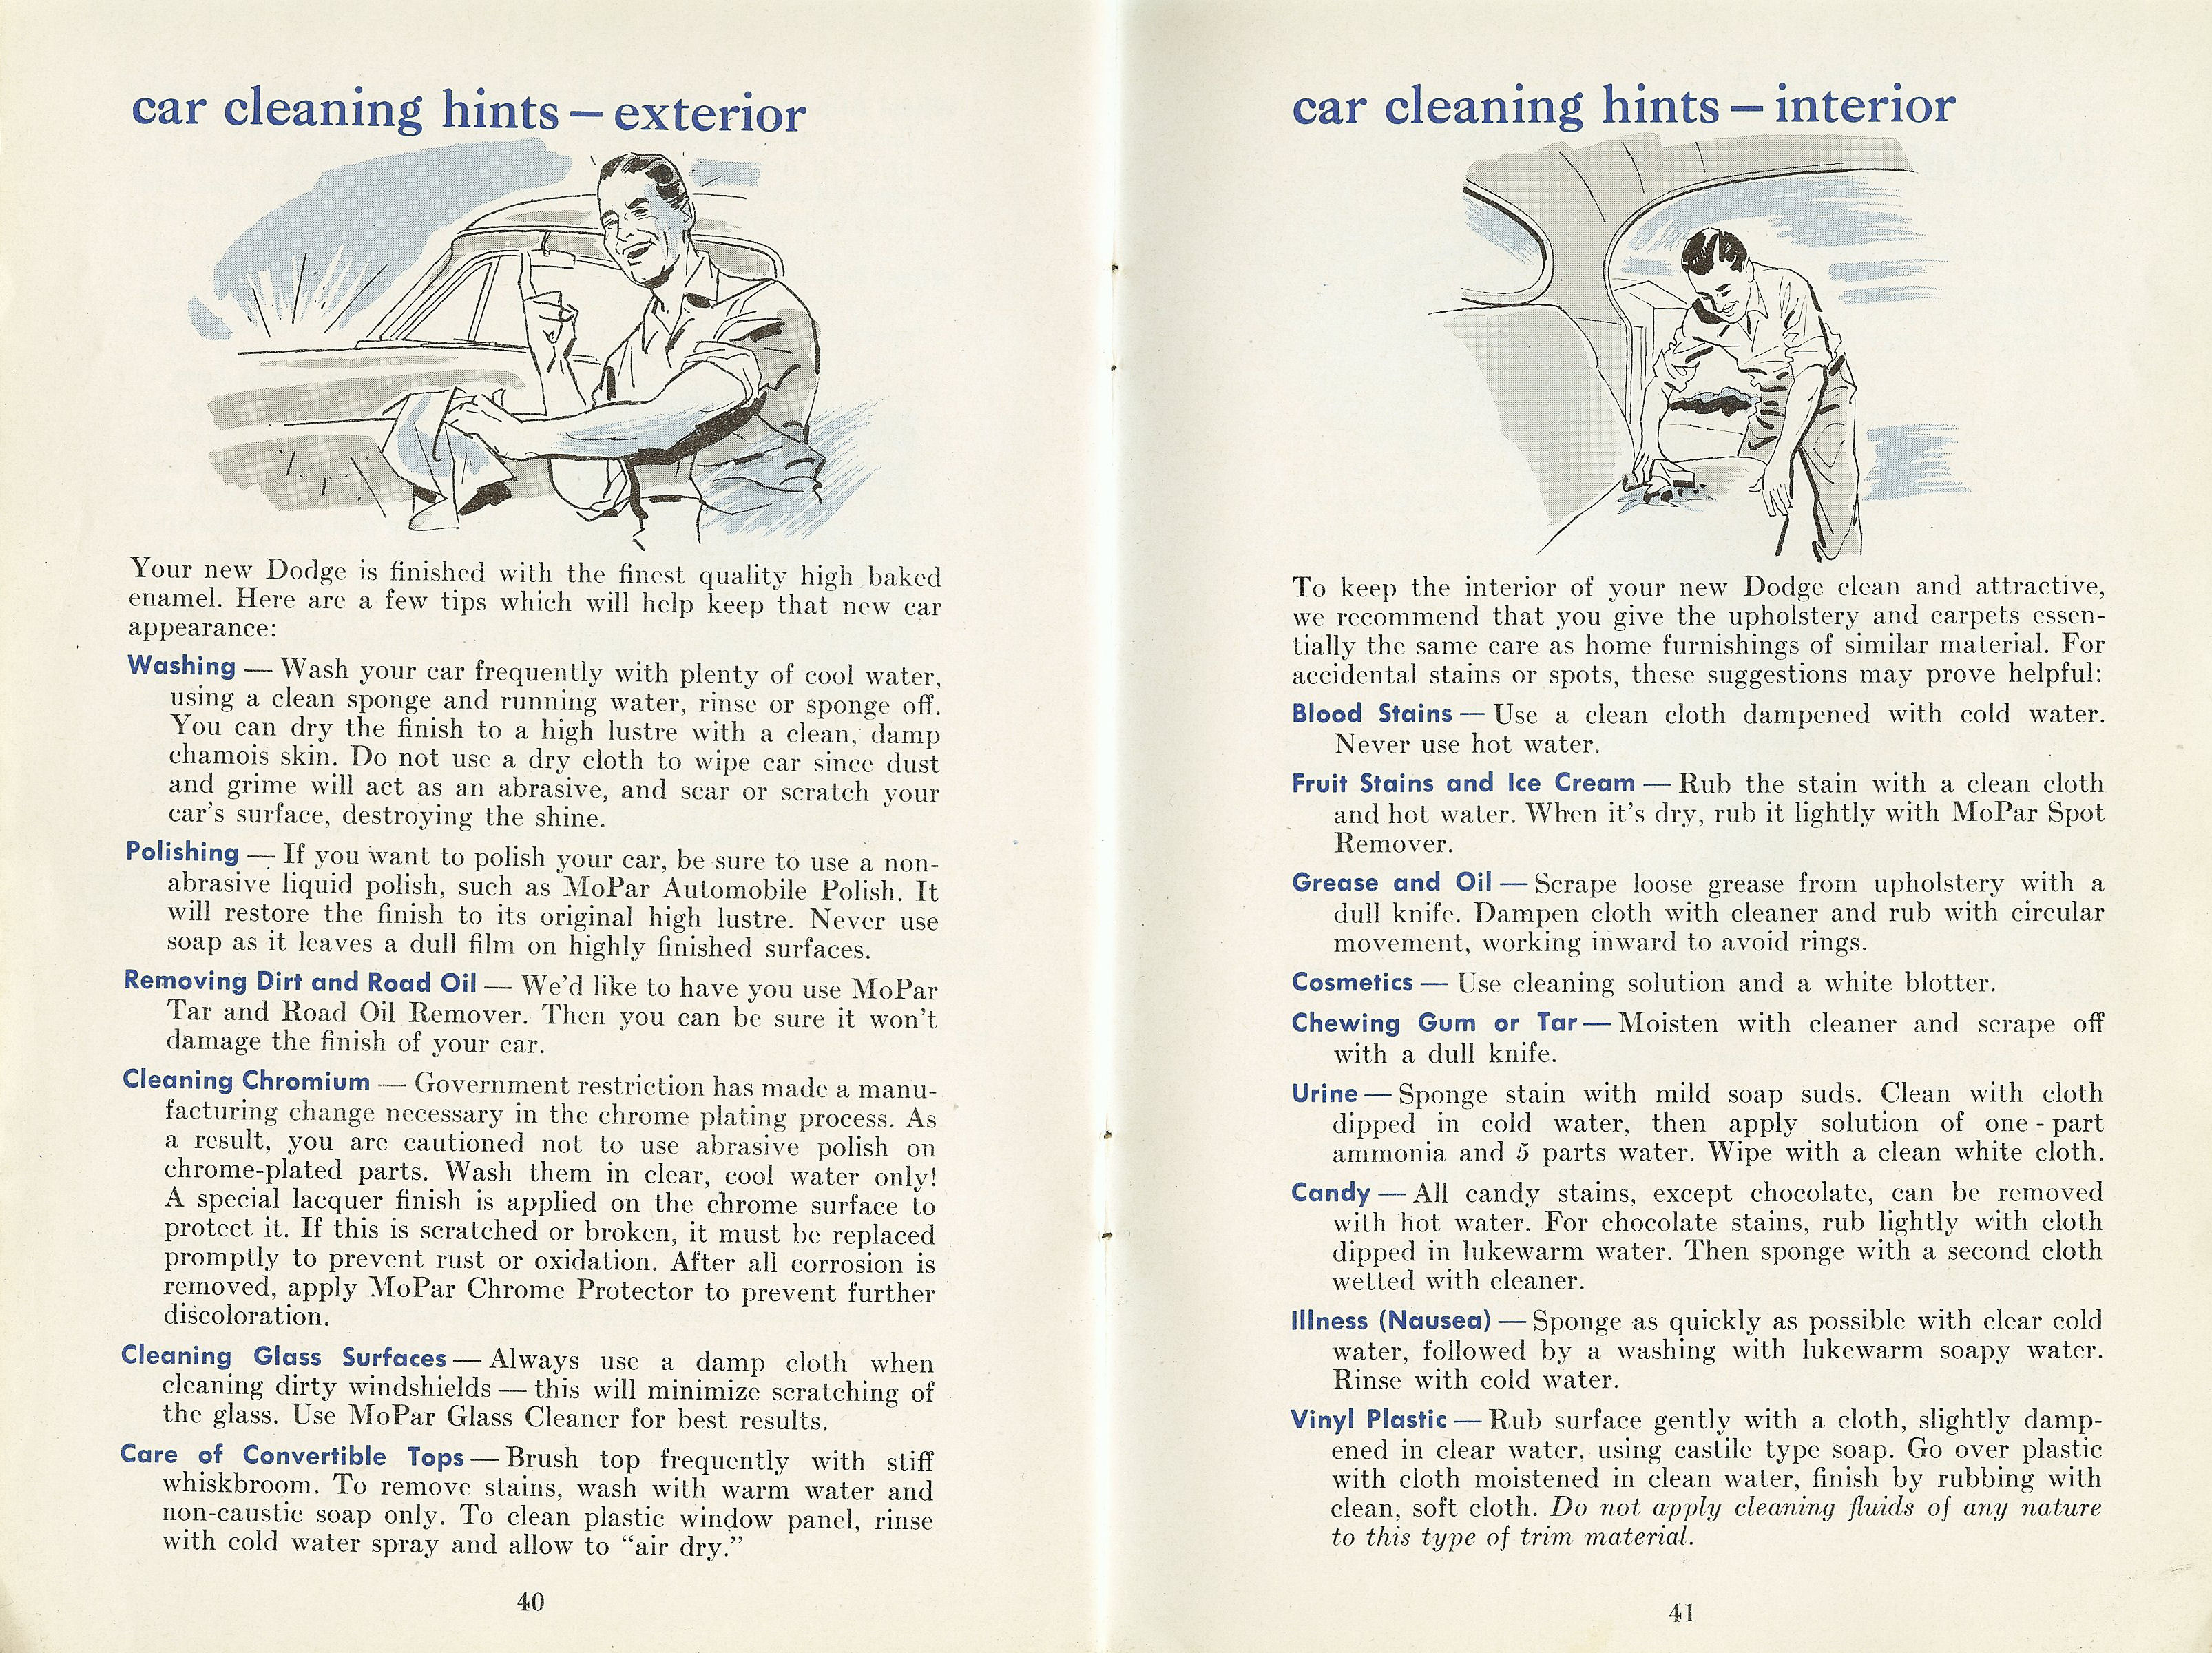 1954 Dodge Car Owners Manual Page 29